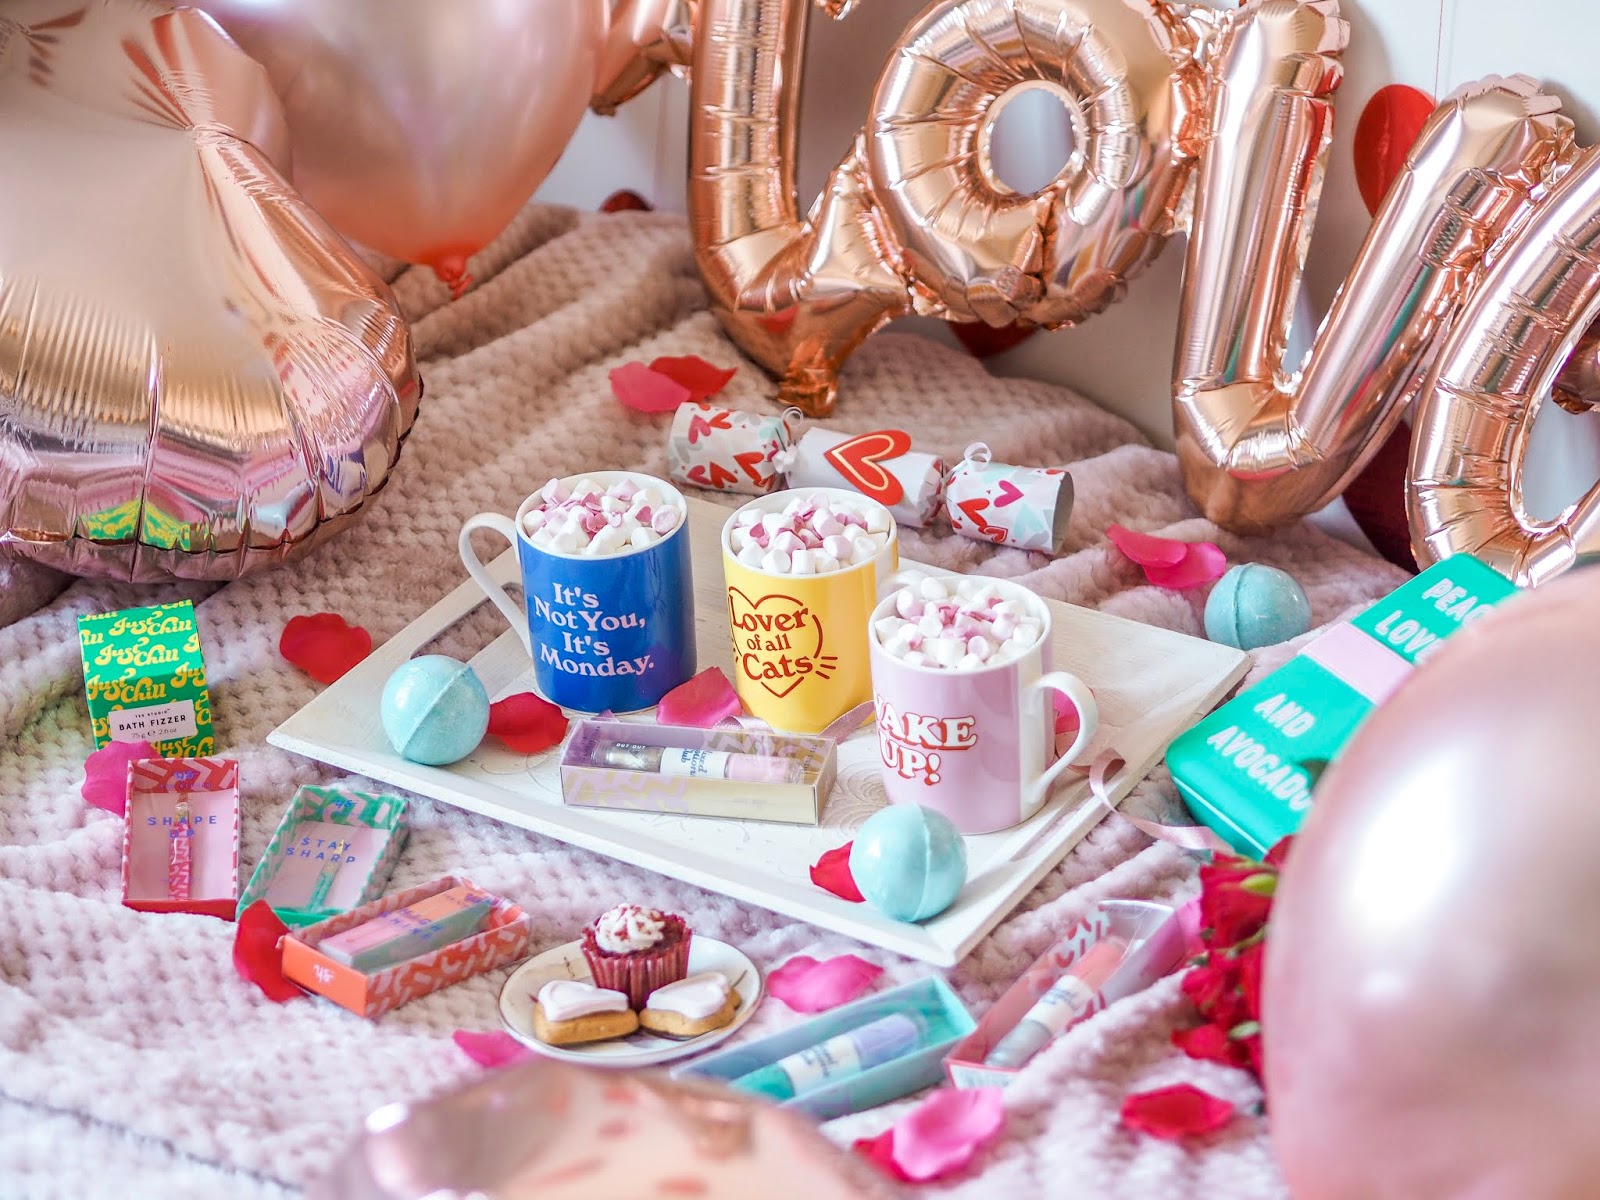 Celebrating Galentine's Day feat. Yes Studio, UK Blogger, Katie Kirk Loves, Galentines Gifts, Gifts for Her, Valentines Gifts, Girls Night, Girlie Day, Girls Night In, Valentines Style, Yes Studio Designs